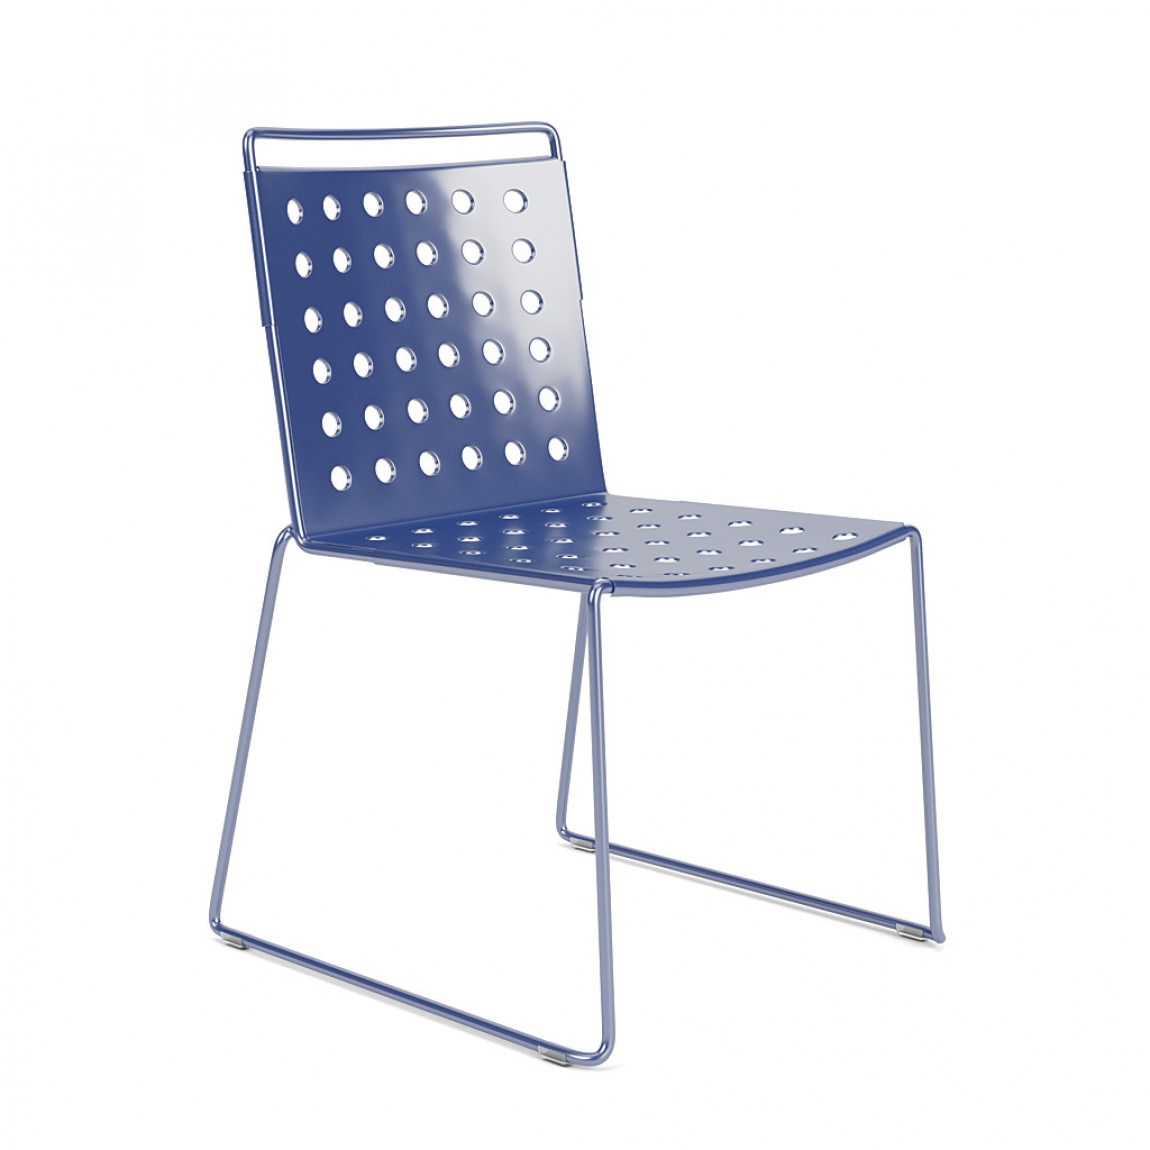 Stackable Outdoor Chair, Set of 10 with Included Dolly